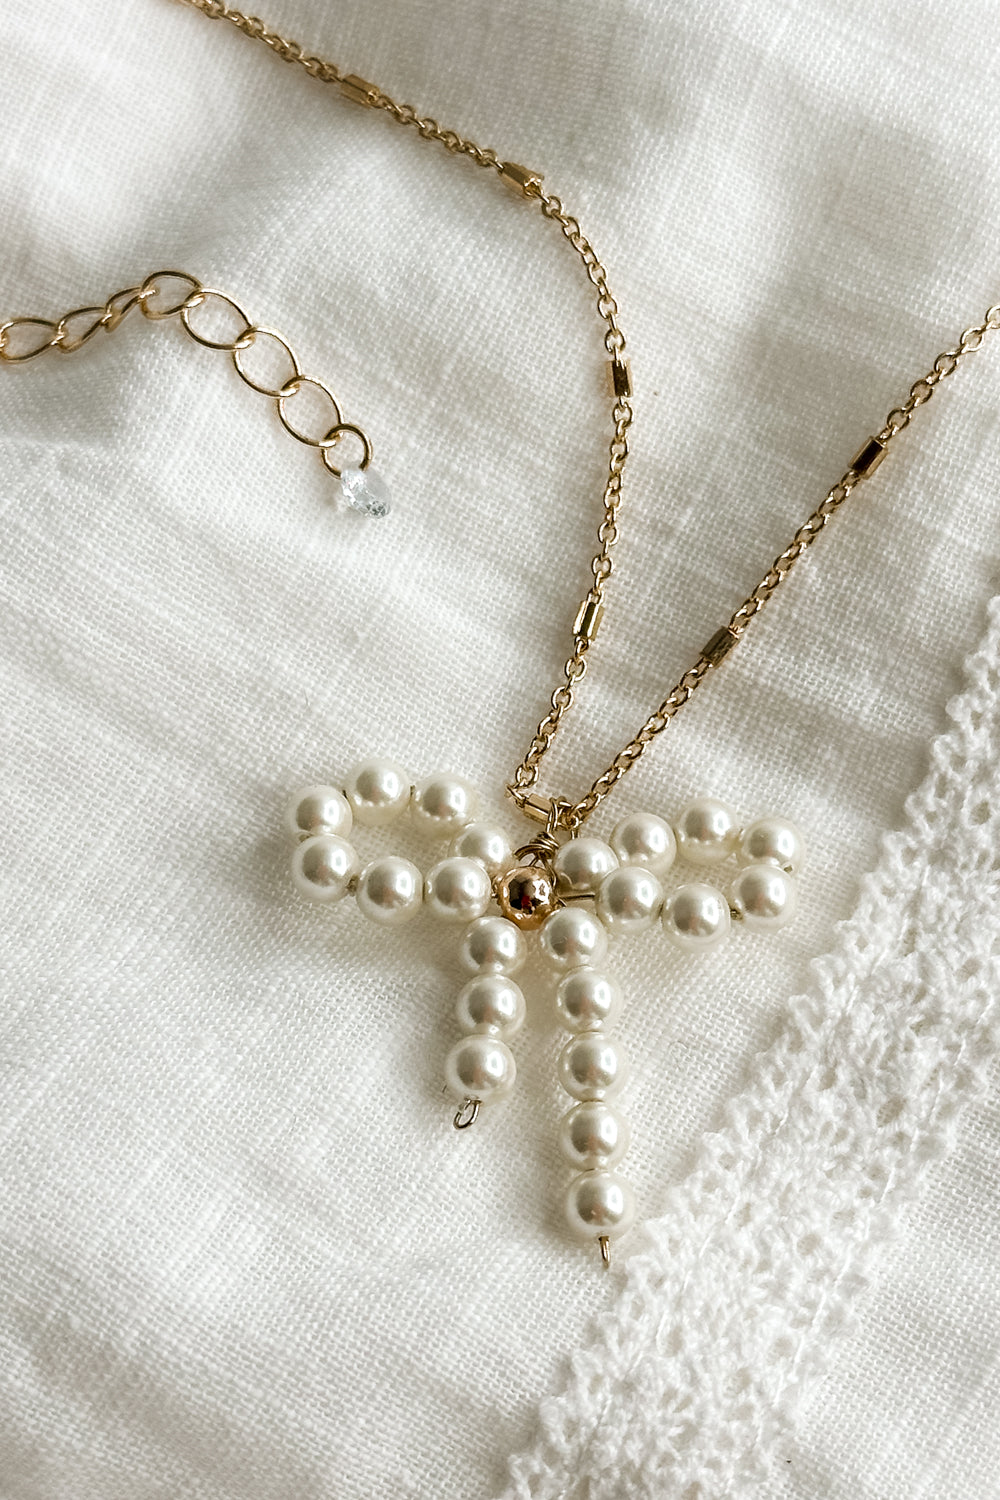 Close up view of the Mia Gold & Pearl Bow Necklace which features adjustable gold chain link with pearl bow attachment